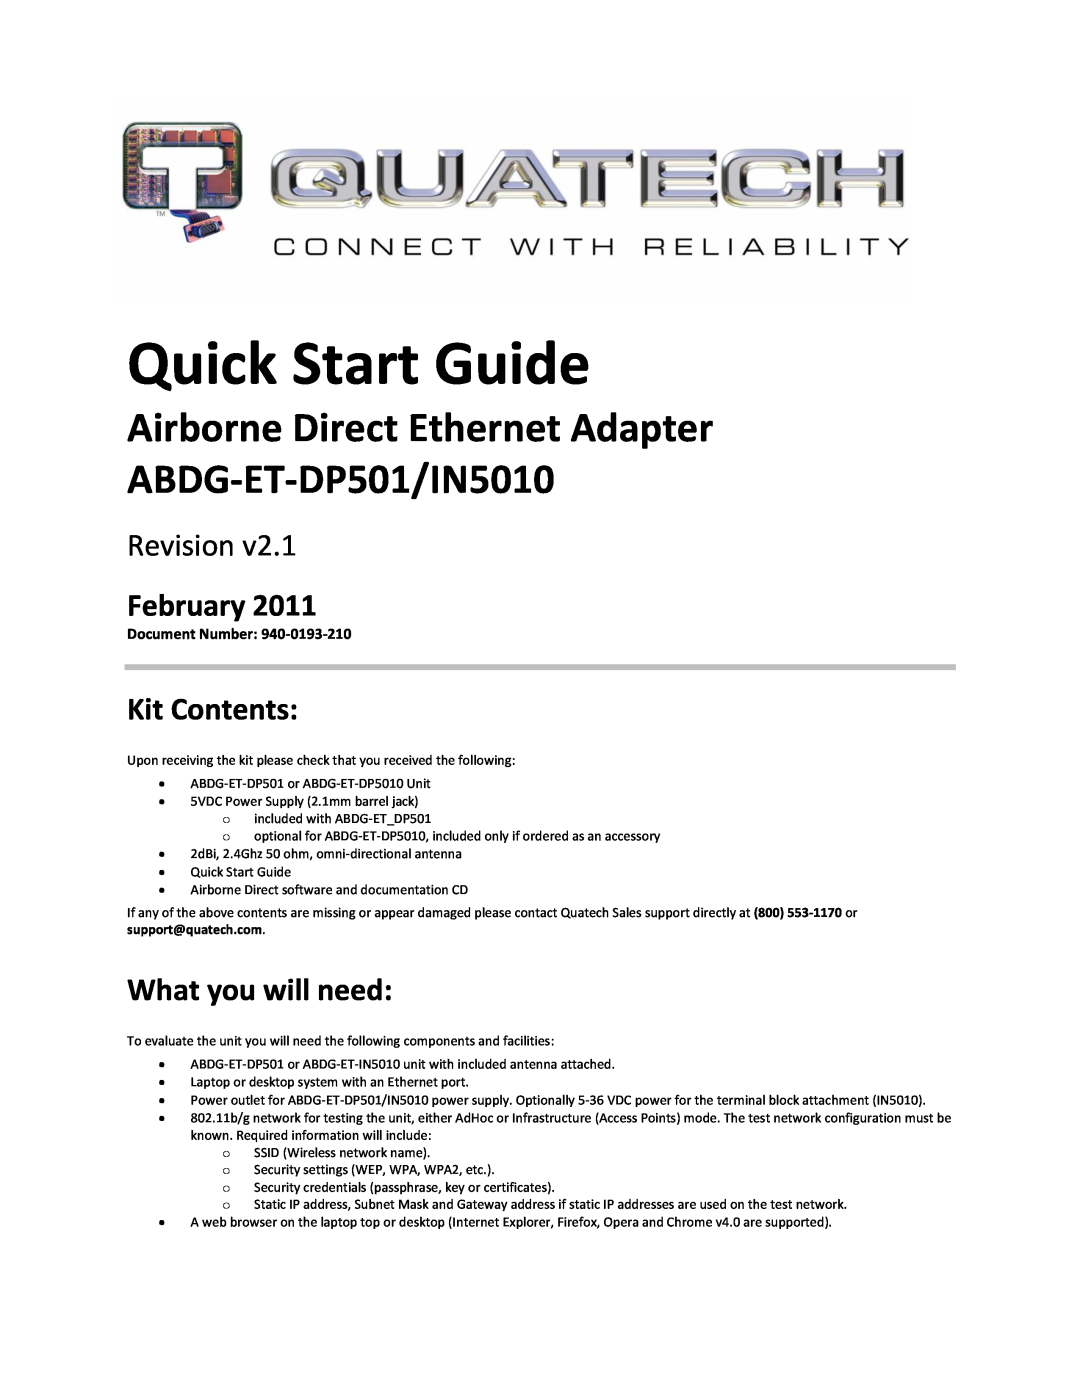 Quatech ABDG-ET-DP501/IN5010 quick start February, Kit Contents, What you will need, Quick Start Guide, Revision 